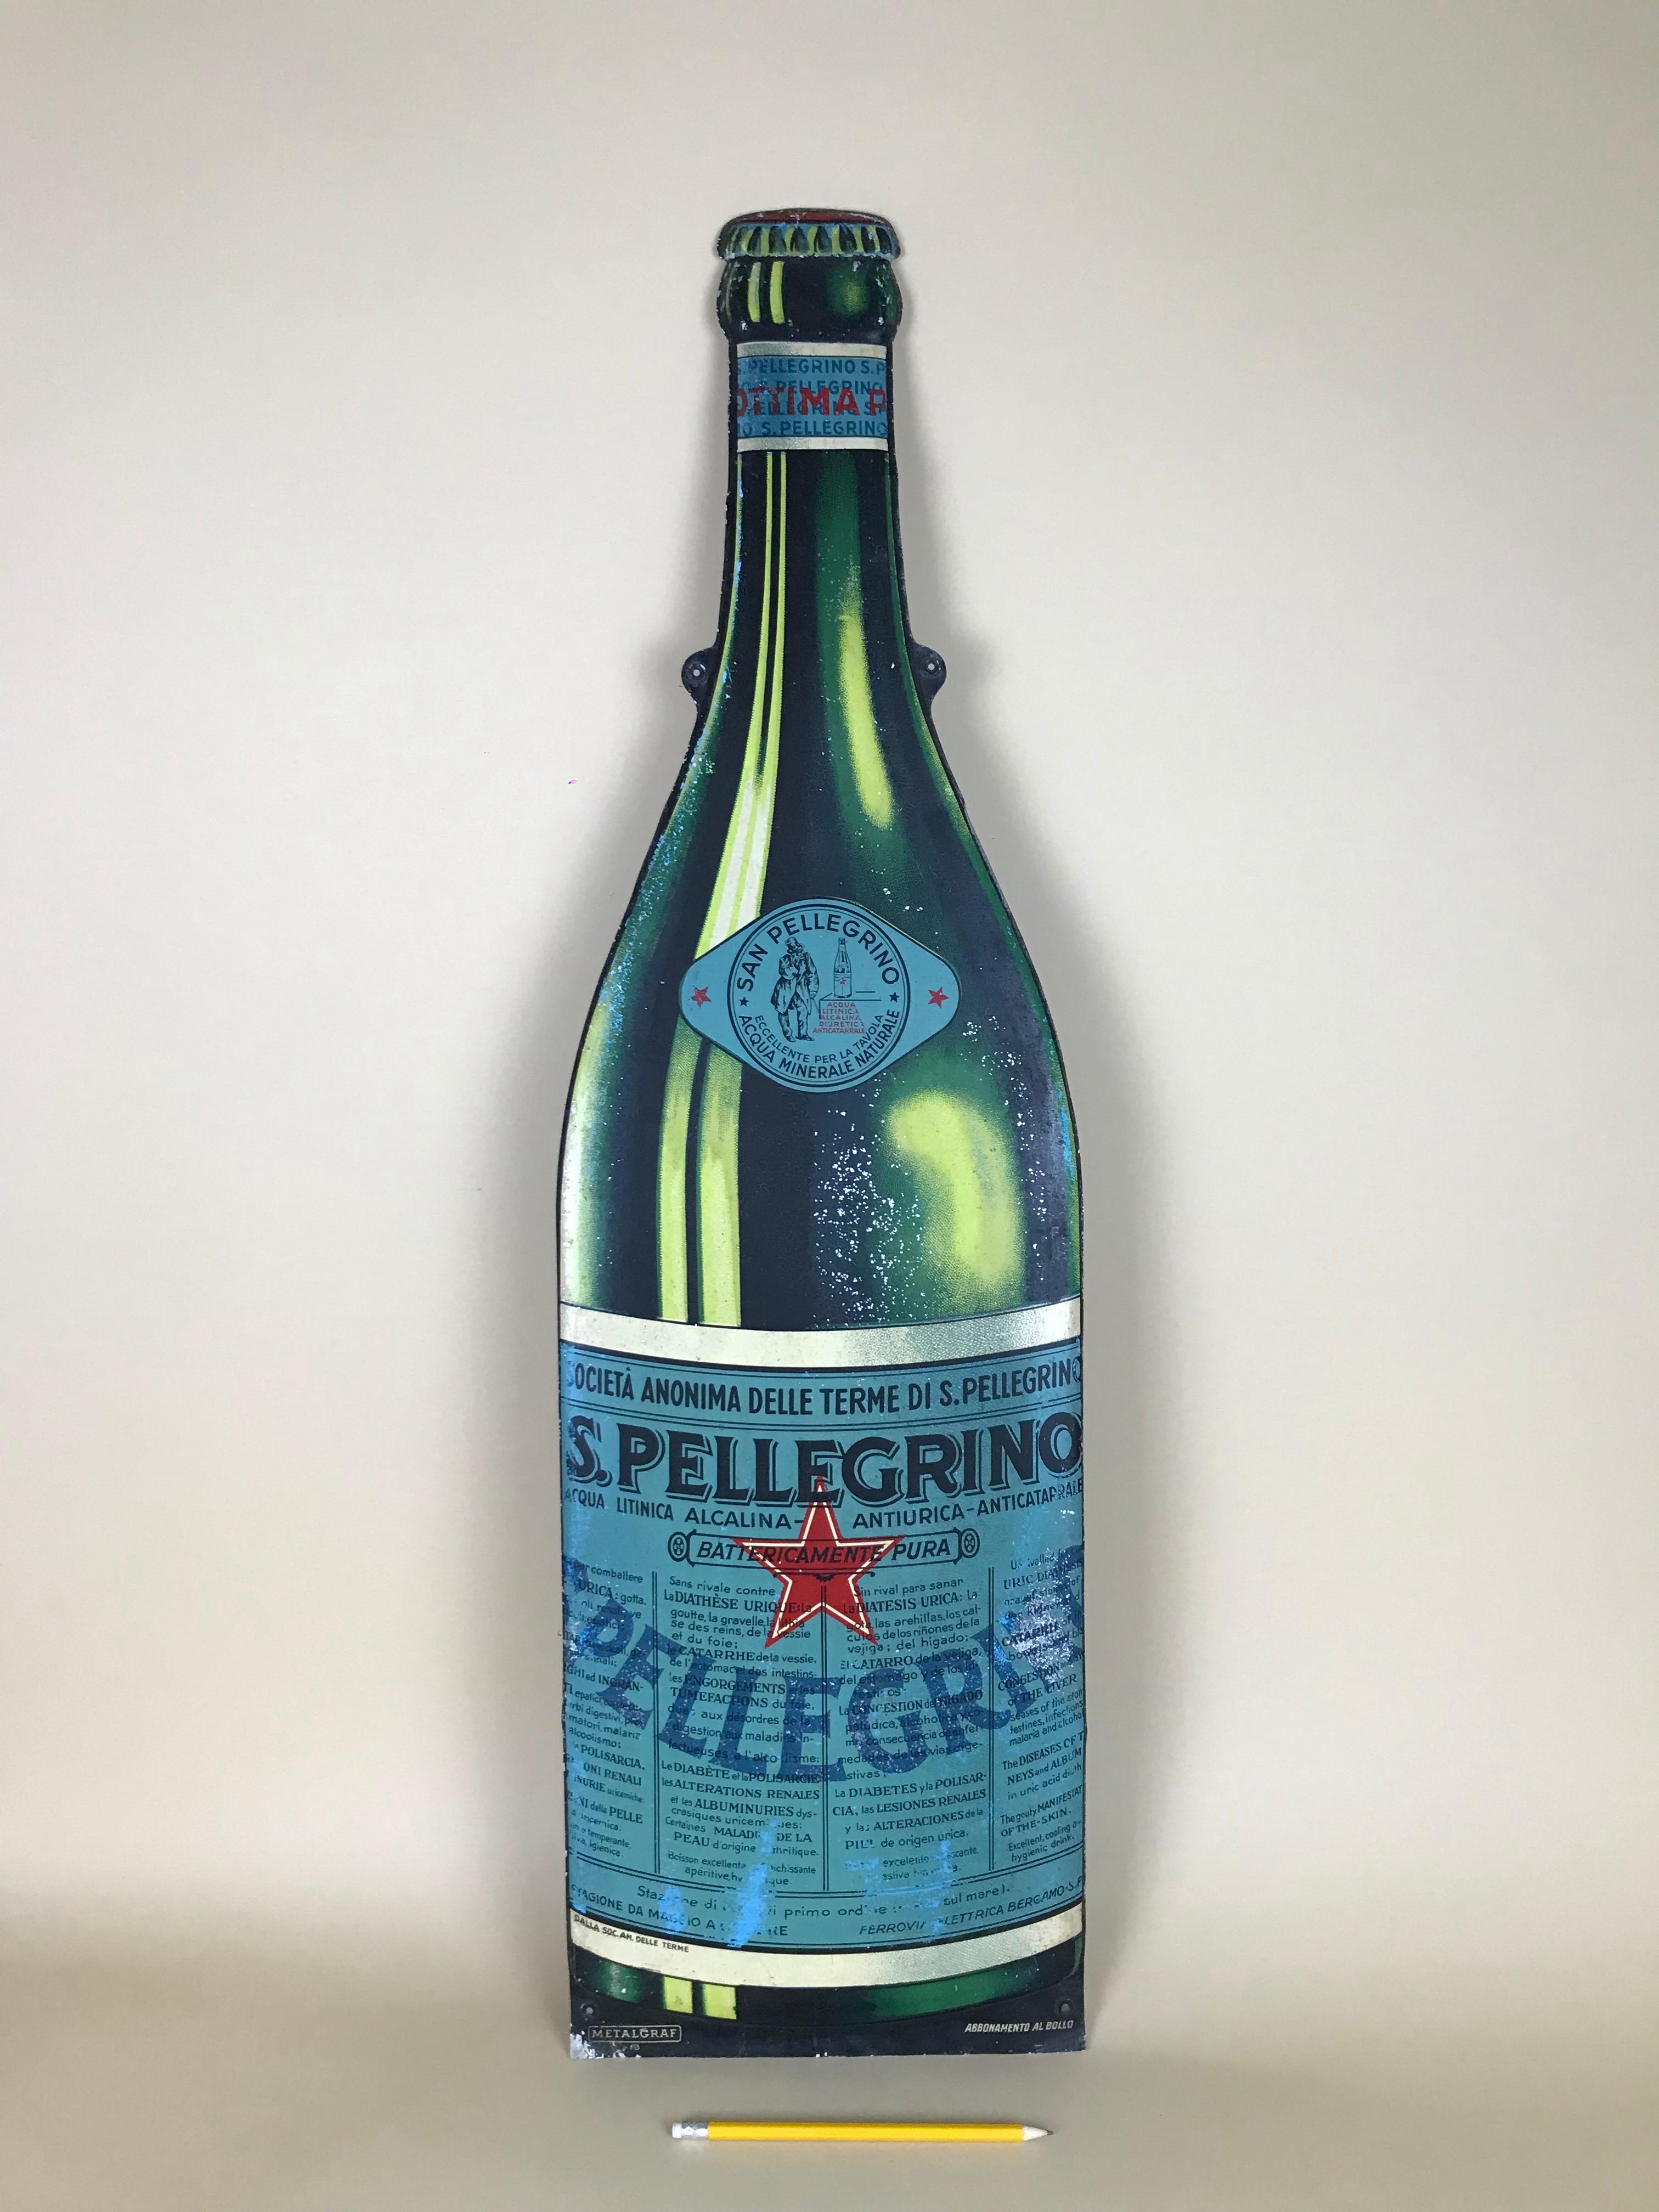 Vintage San Pellegrino Mineral Water lithography on tin sign made in the 1940s, in Milan ( Italy) by Metalgraf for advertising purpose.

Collector's note:

S.Pellegrino is an Italian natural mineral water brand, famous all over the world, owned